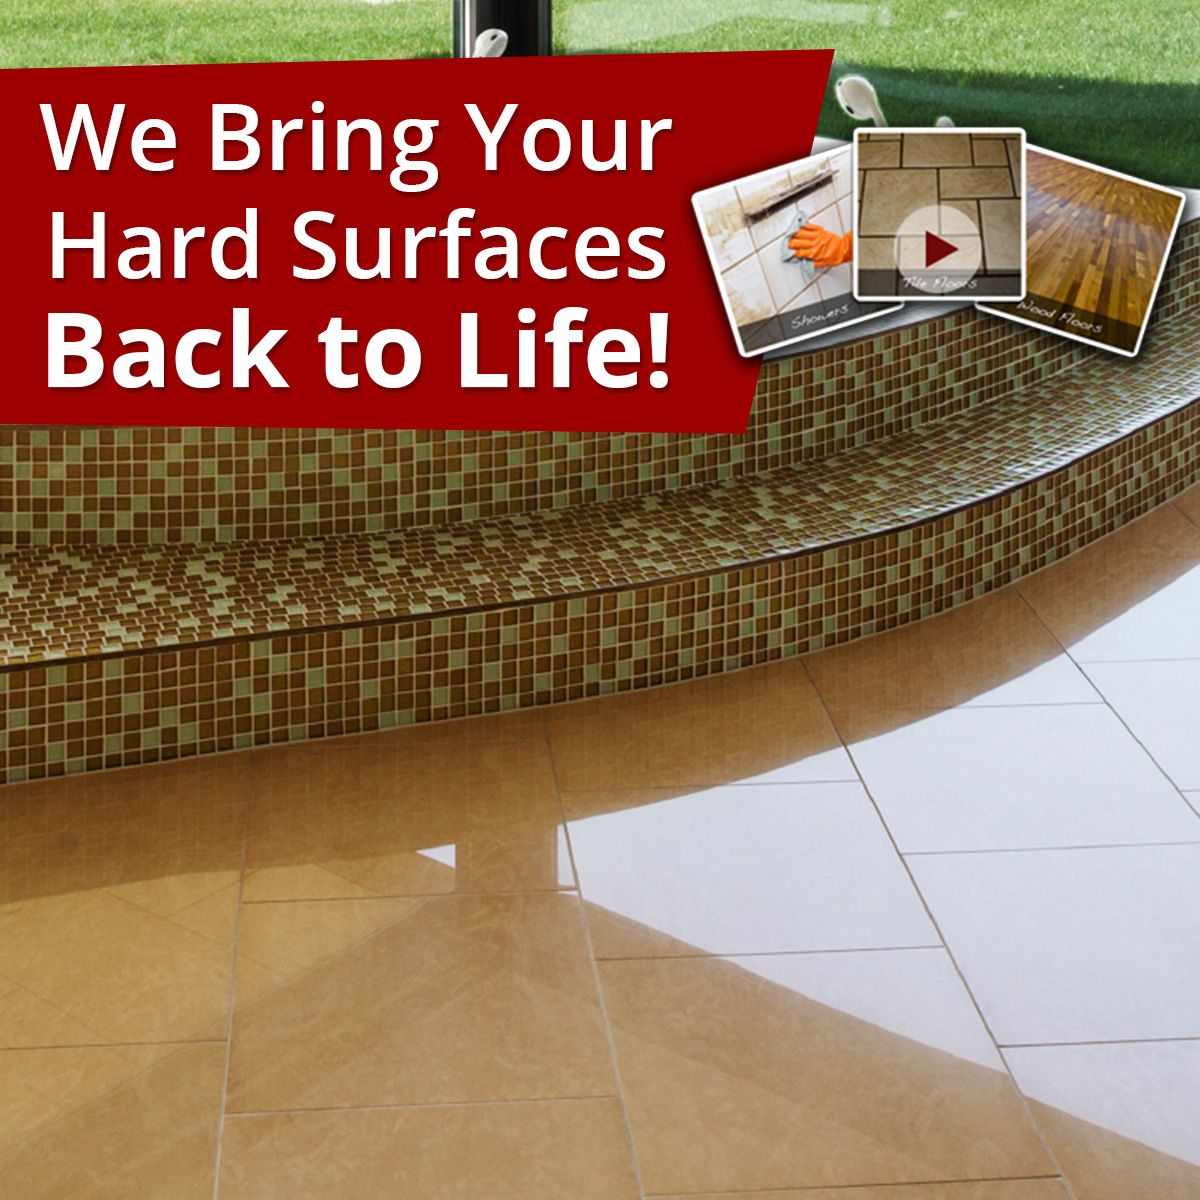 We Bring Your Hard Surfaces Back to Life!